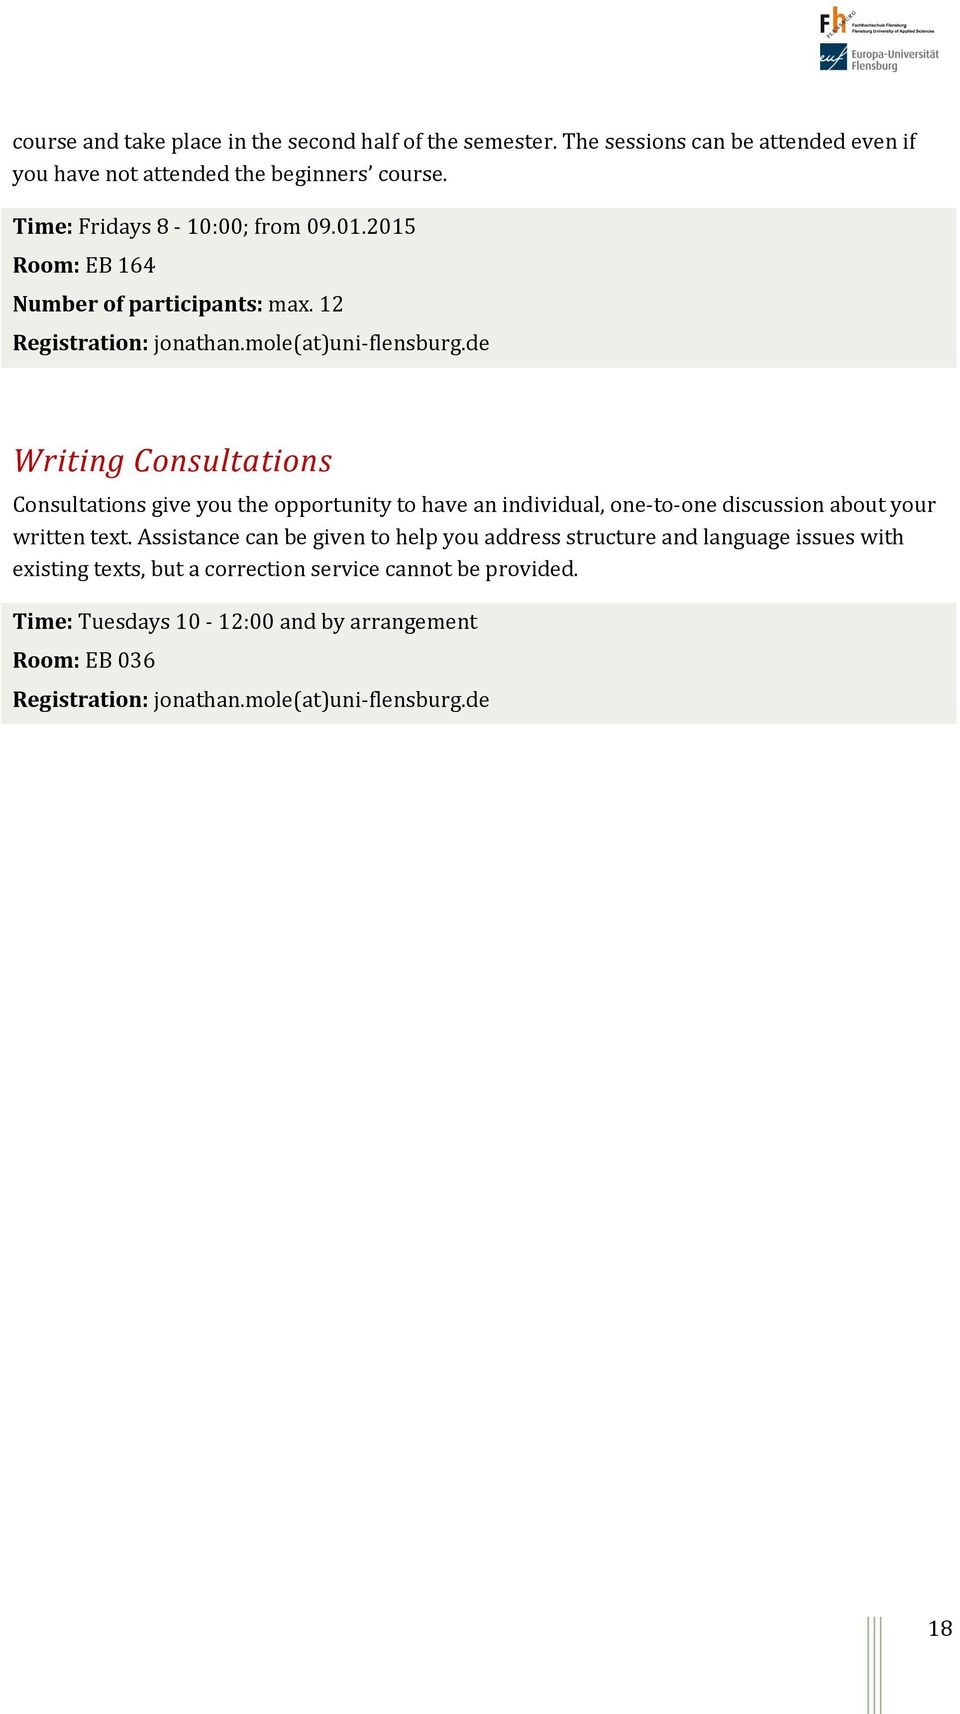 12 Writing Consultations Consultations give you the opportunity to have an individual, one-to-one discussion about your written text.